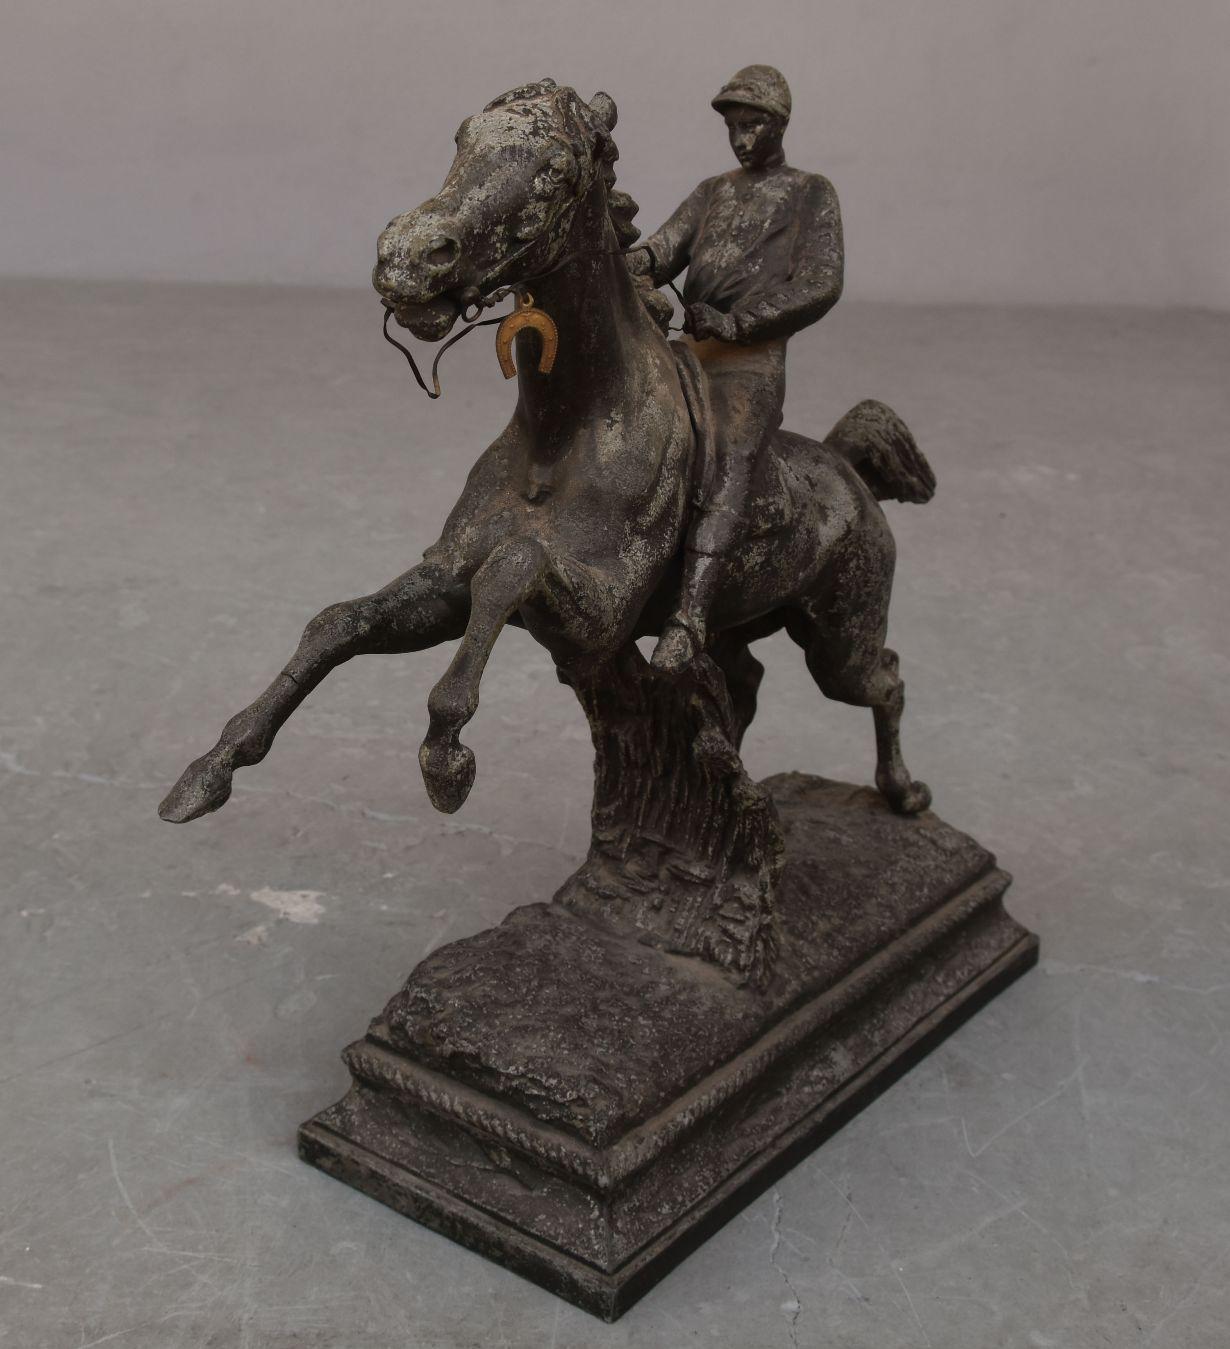 1930 Spelter sculpture representing Jockey and his horse.